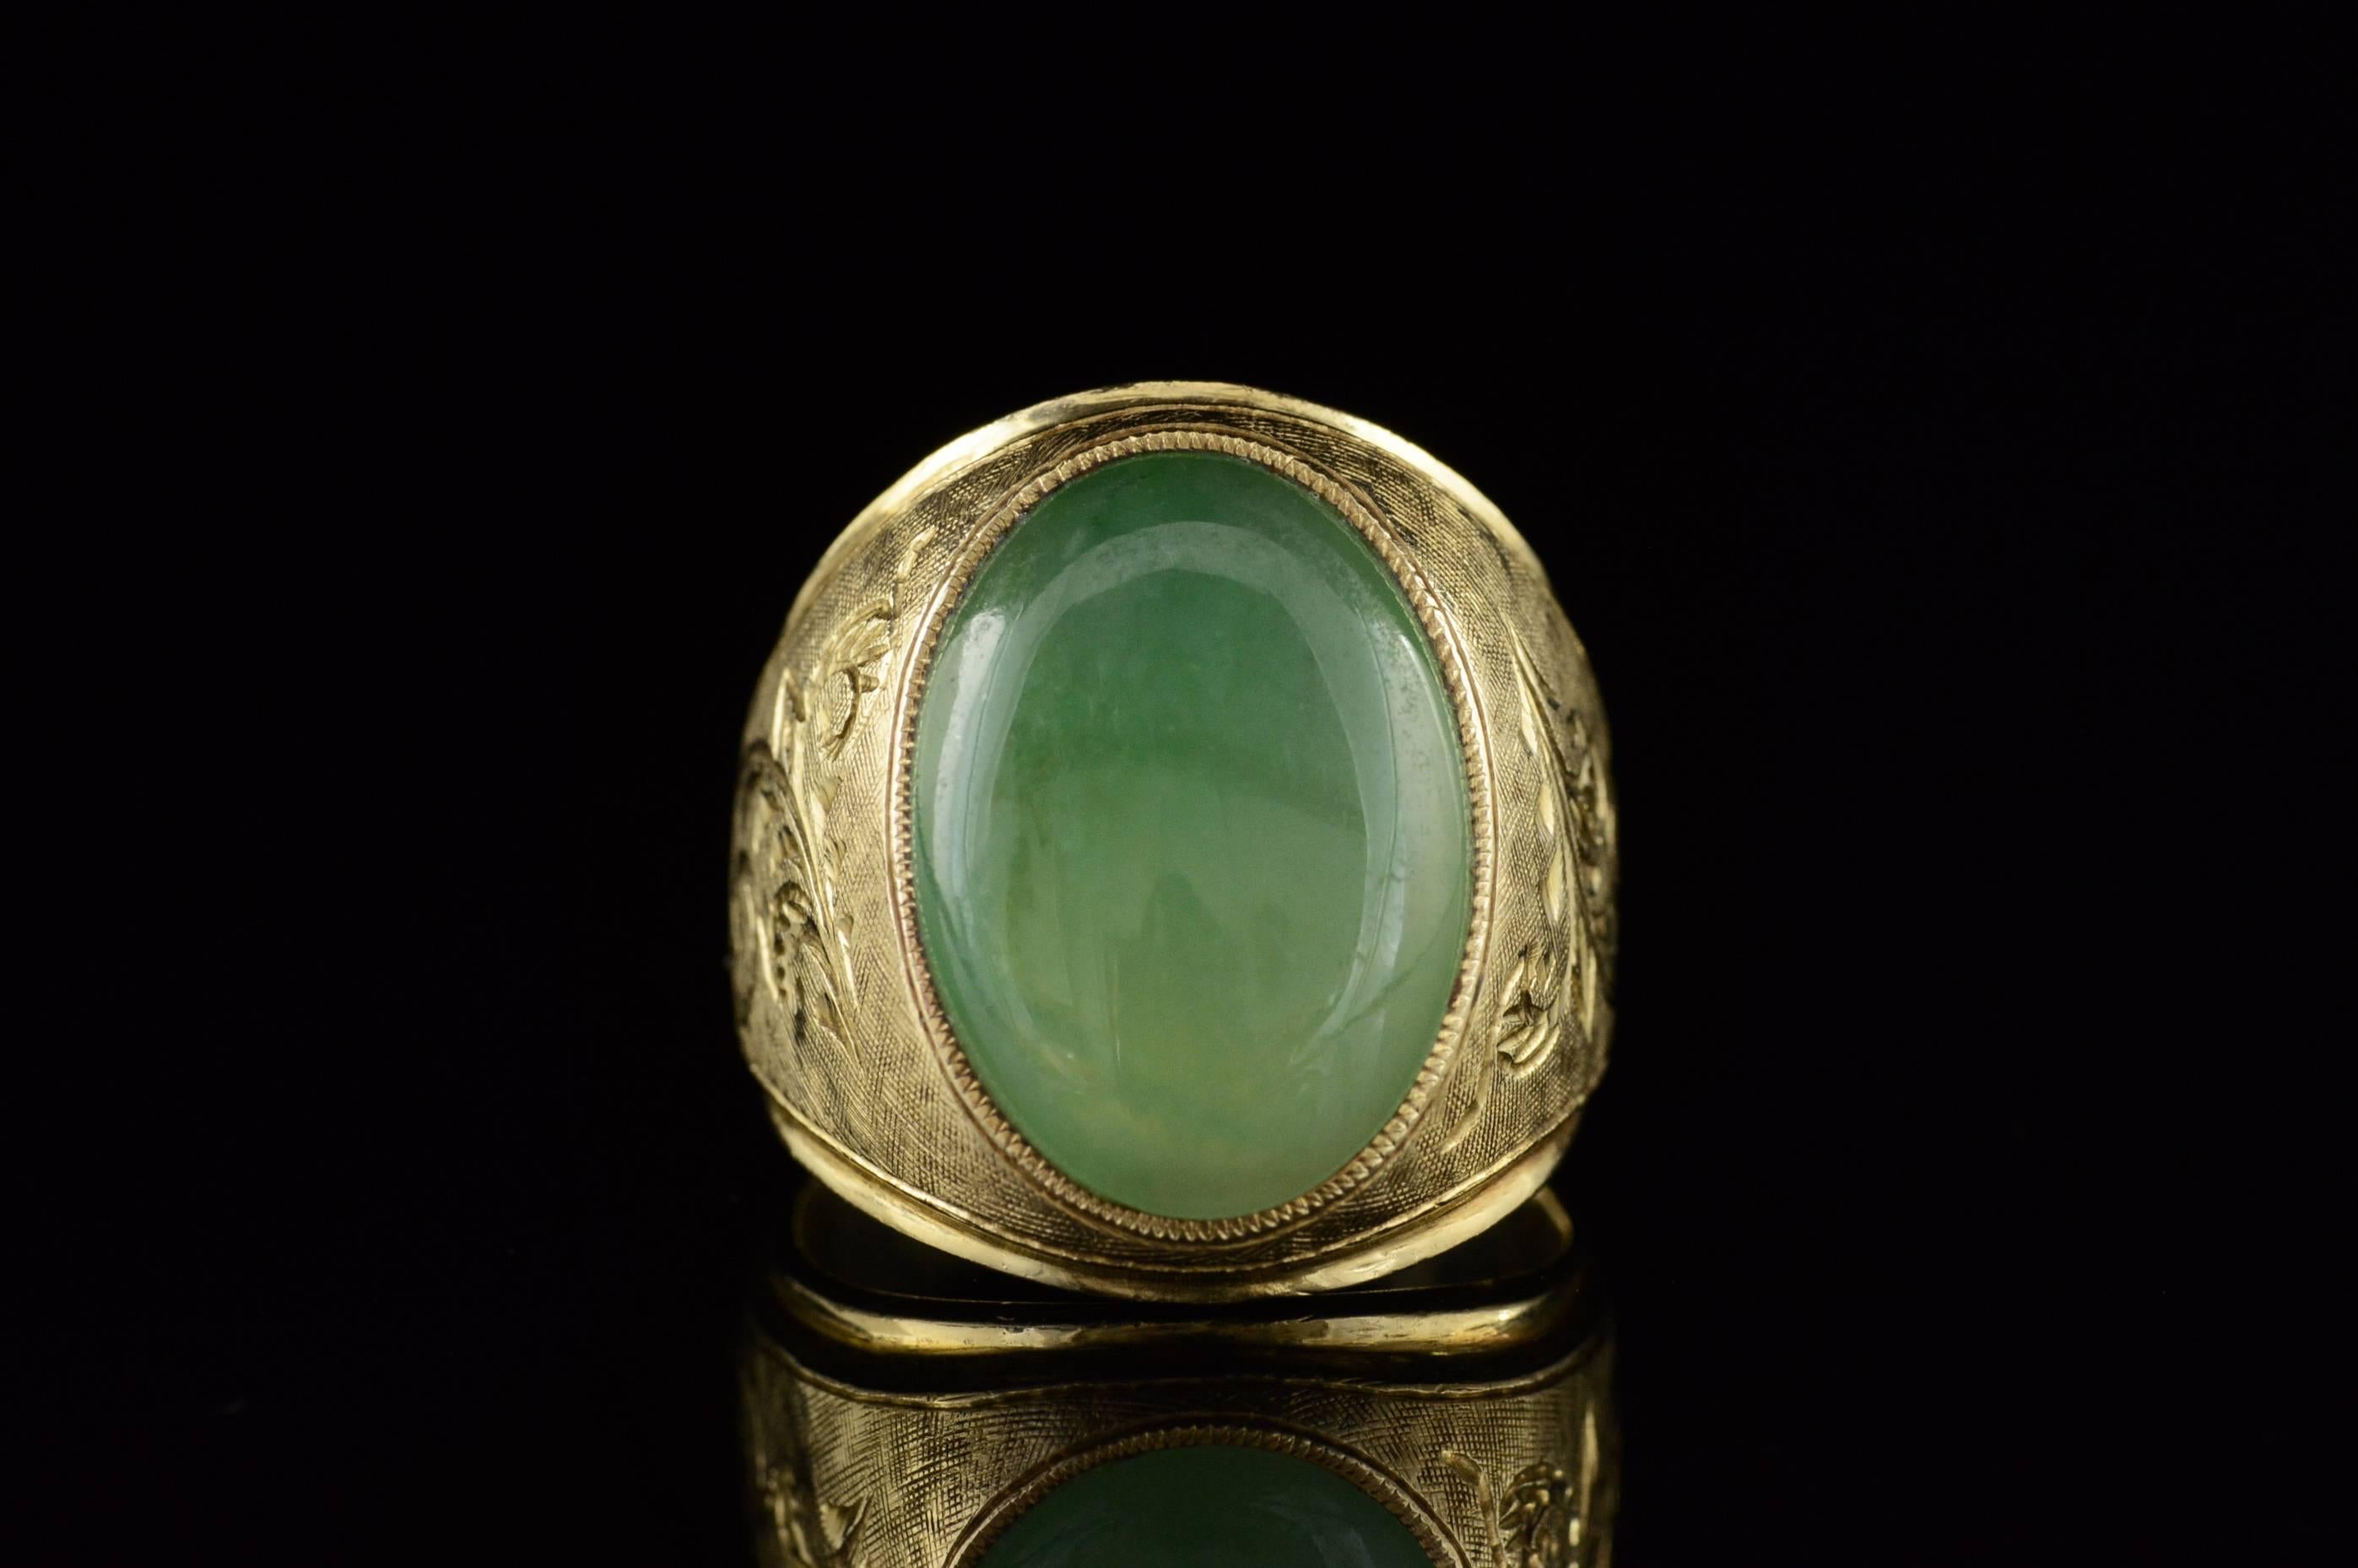 ·Item: 18K 18x13mm Oval Green Jade Engraved Ring Size 8.75 Yellow Gold

·Era: Vintage / 1940s

·Composition: 18k Gold Marked / Tested

·Gem Stone:18x13mm Oval Green Jade 

·Weight: 5.9g